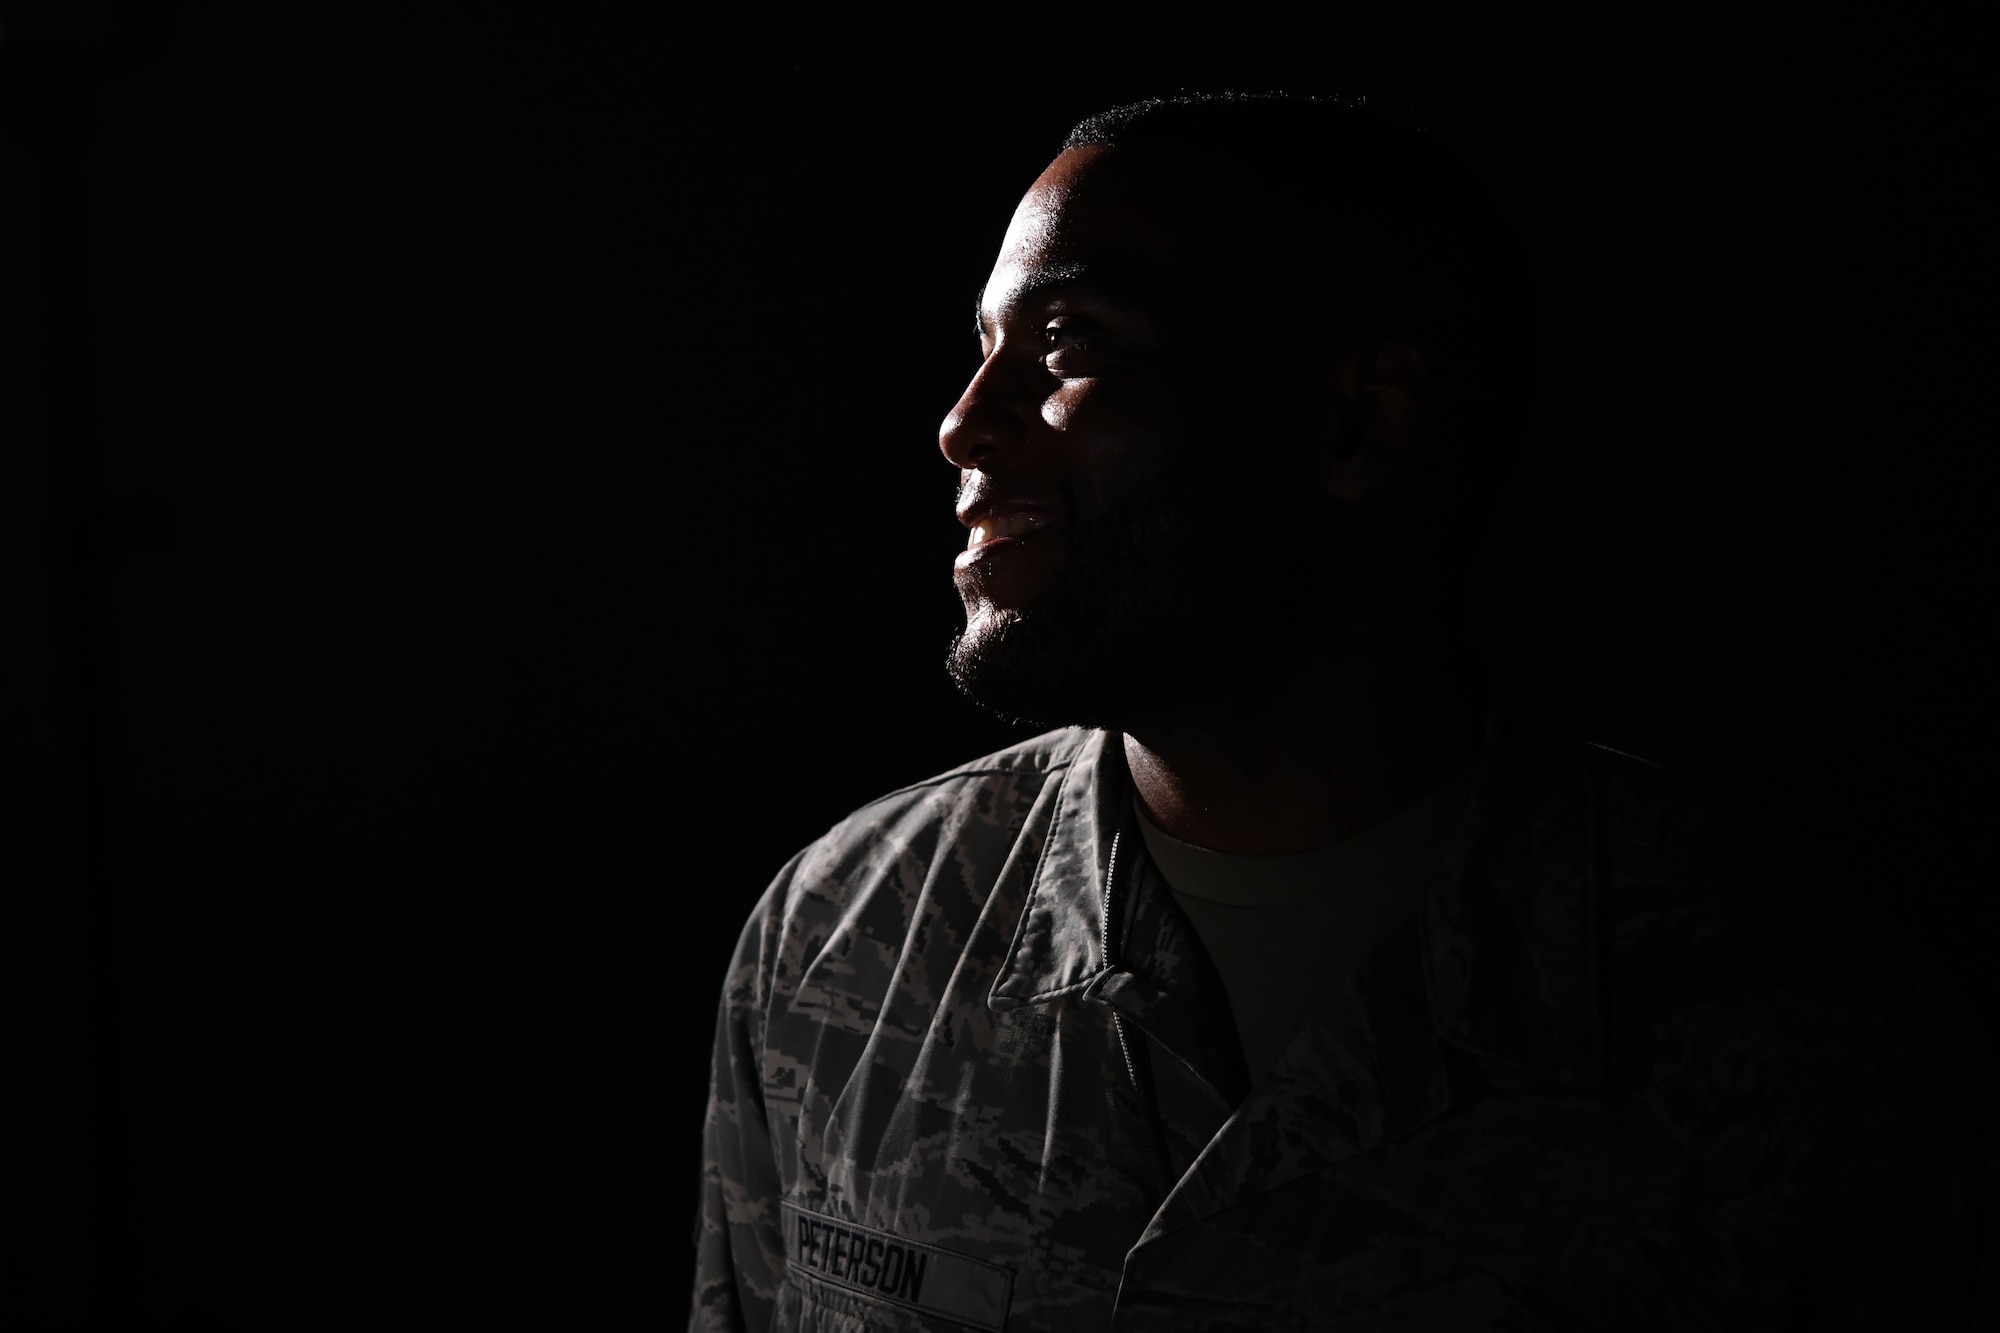 Staff Sgt. Jarrod Peterson, a 72nd Test and Evaluation Squadron software engineer, poses for a photo, July 8, 2020, at Whiteman Air Force Base, Missouri. Peterson, who is an Airman passionate to initiate change within his community, develops and maintains software for training modules in the Air Force. (U.S. Air Force photo by Staff Sgt. Sadie Colbert)